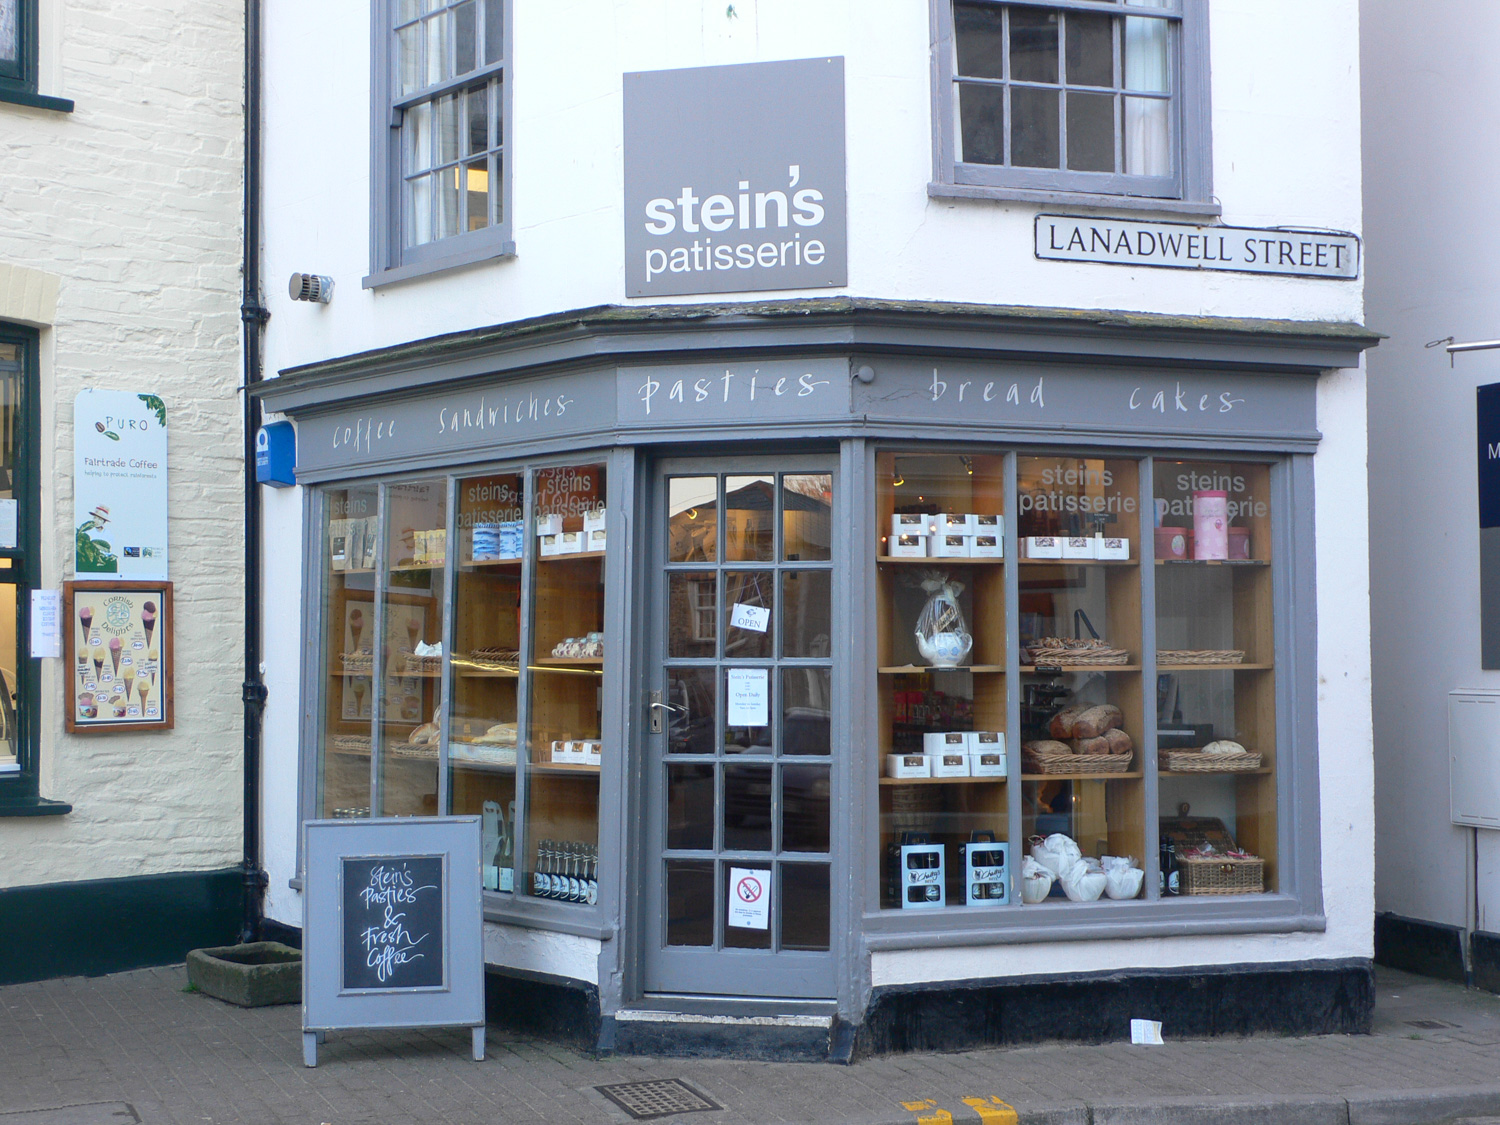 Stein's patisserie in Padstow